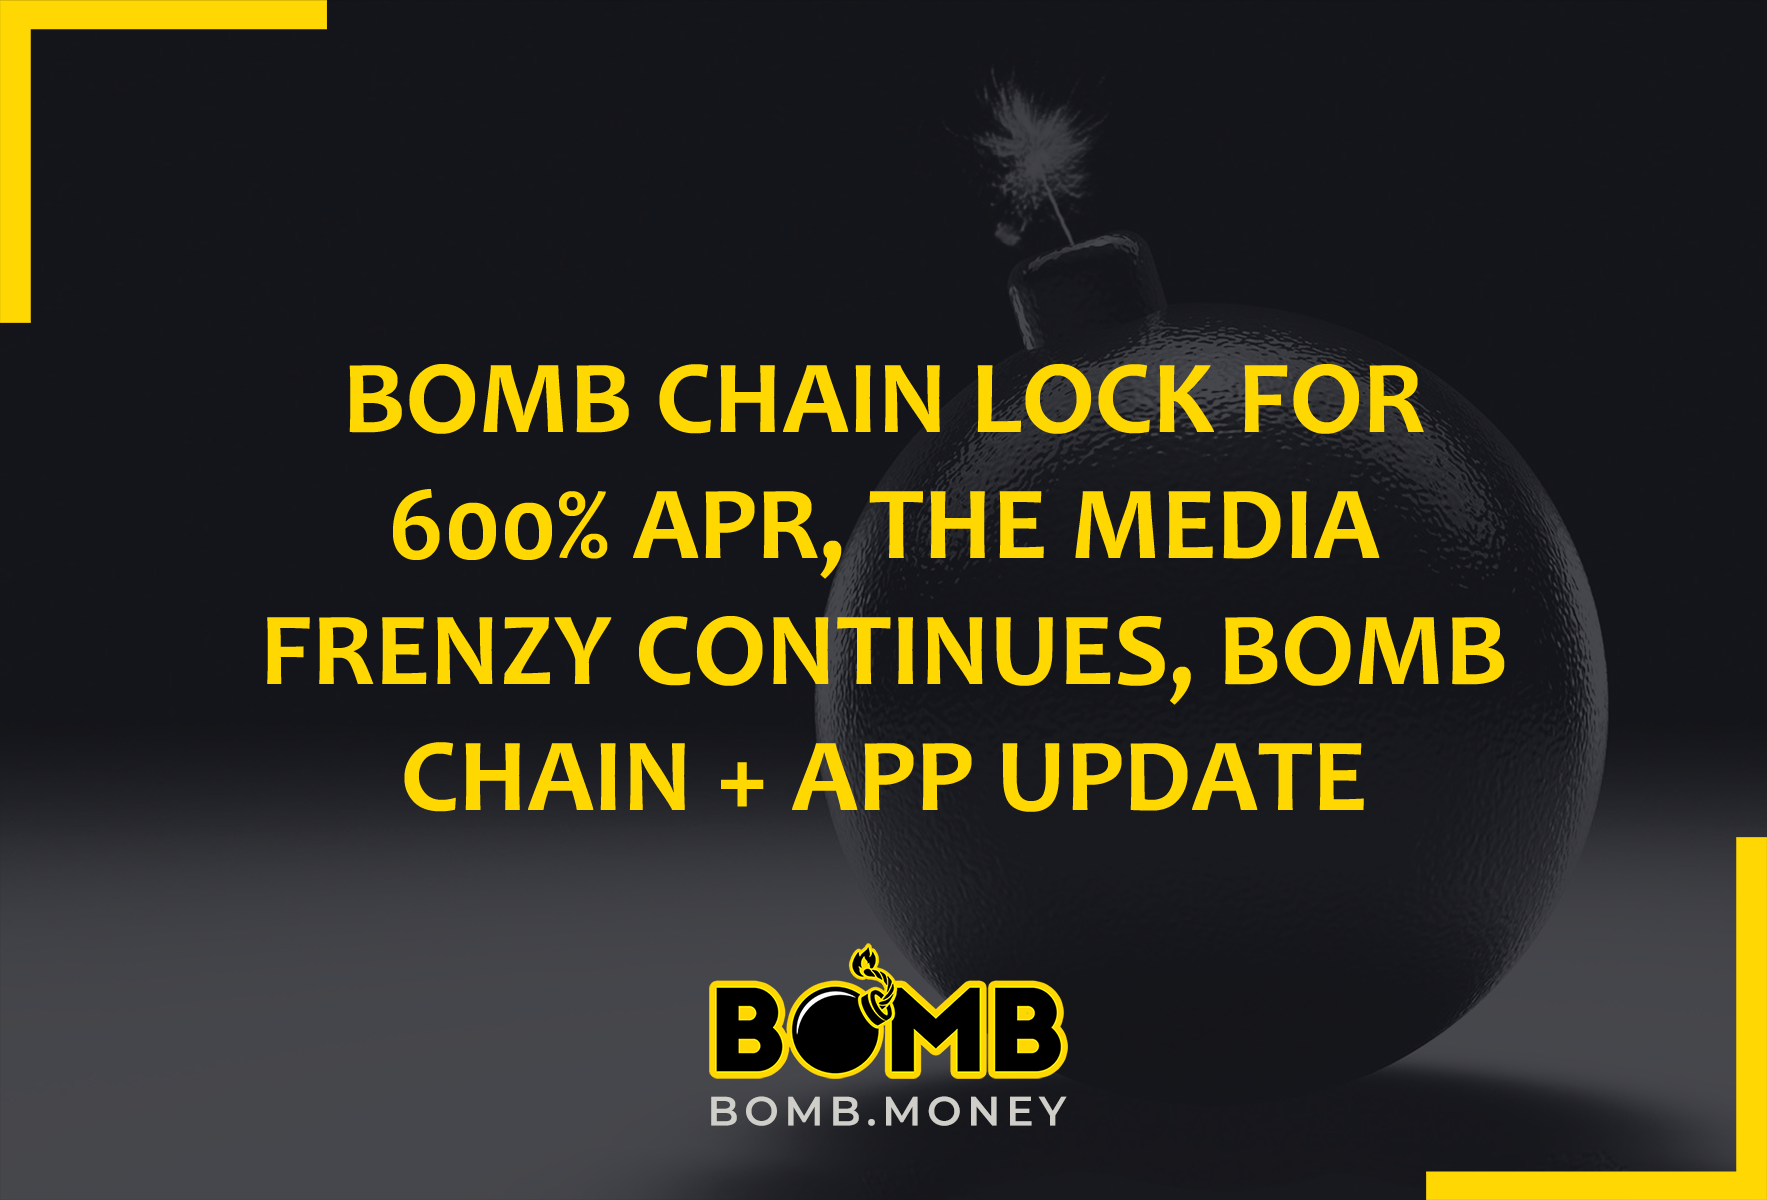 BOMB CHAIN LOCK FOR 600% APR, THE MEDIA FRENZY CONTINUES, BOMB CHAIN + APP UPDATE